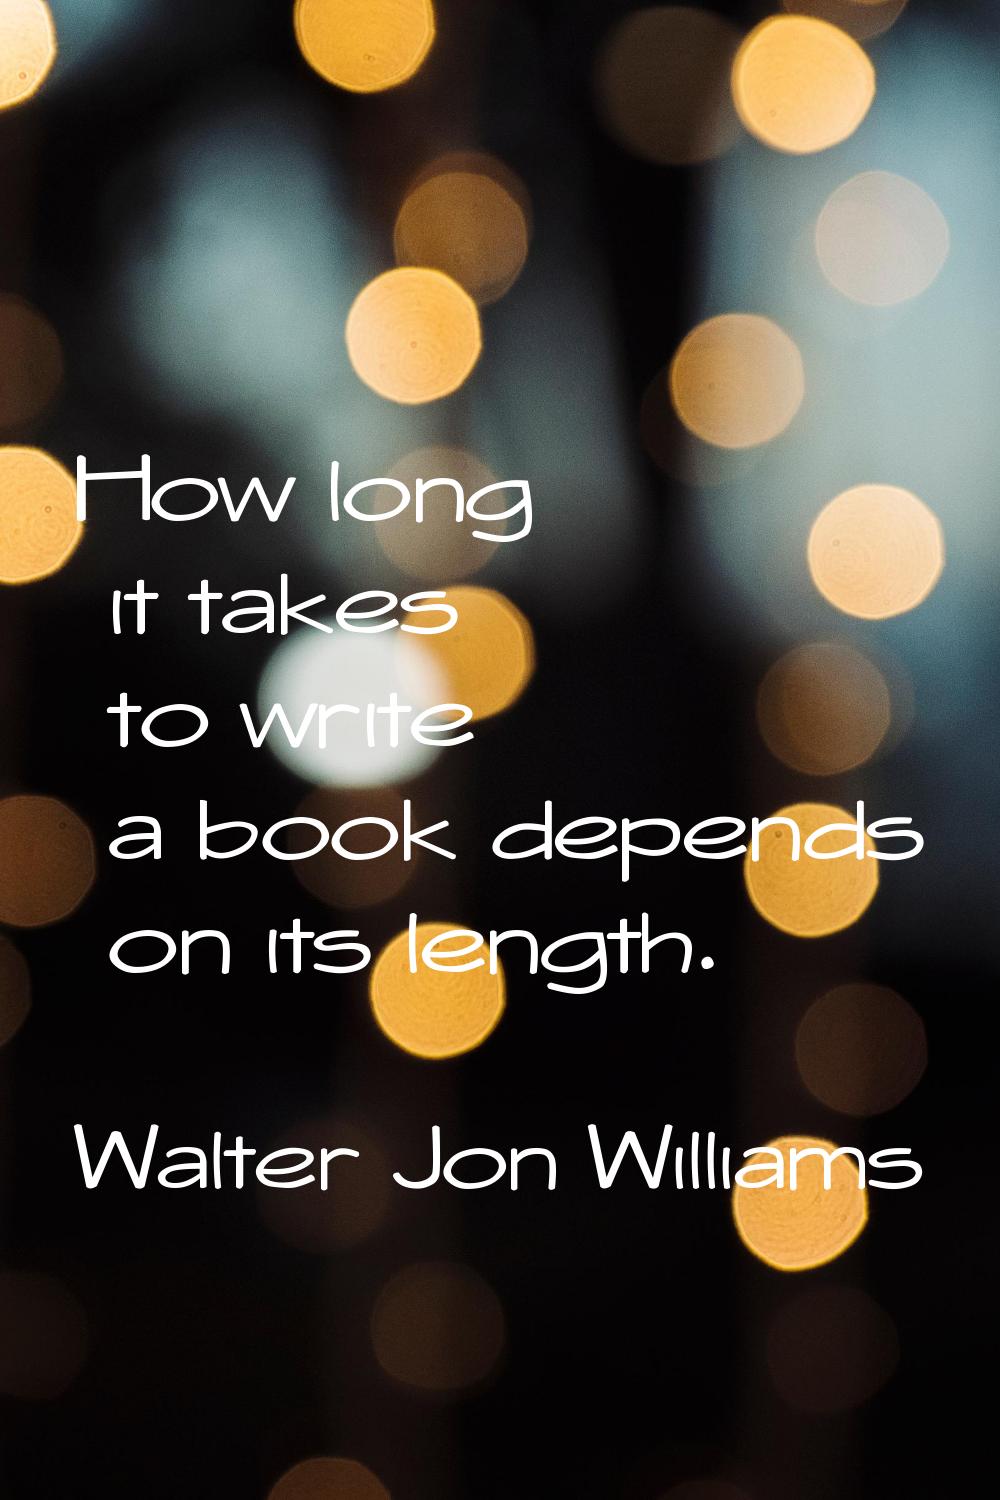 How long it takes to write a book depends on its length.